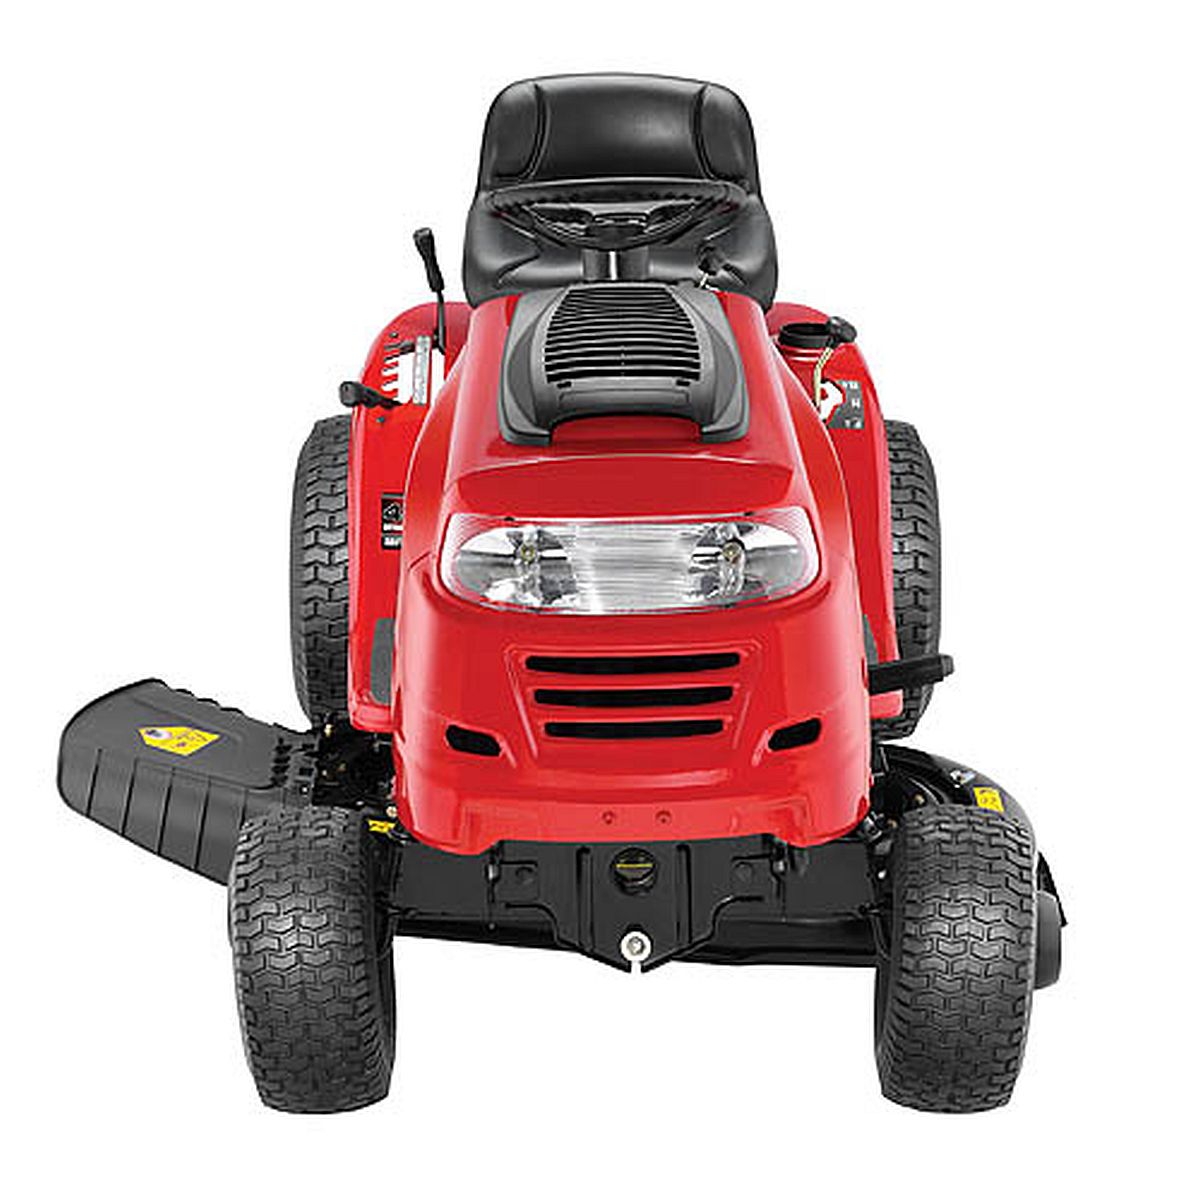 Mtd 4686176 42 Inch 420cc Ohv 7 Speed Tractor Mower At Sutherlands